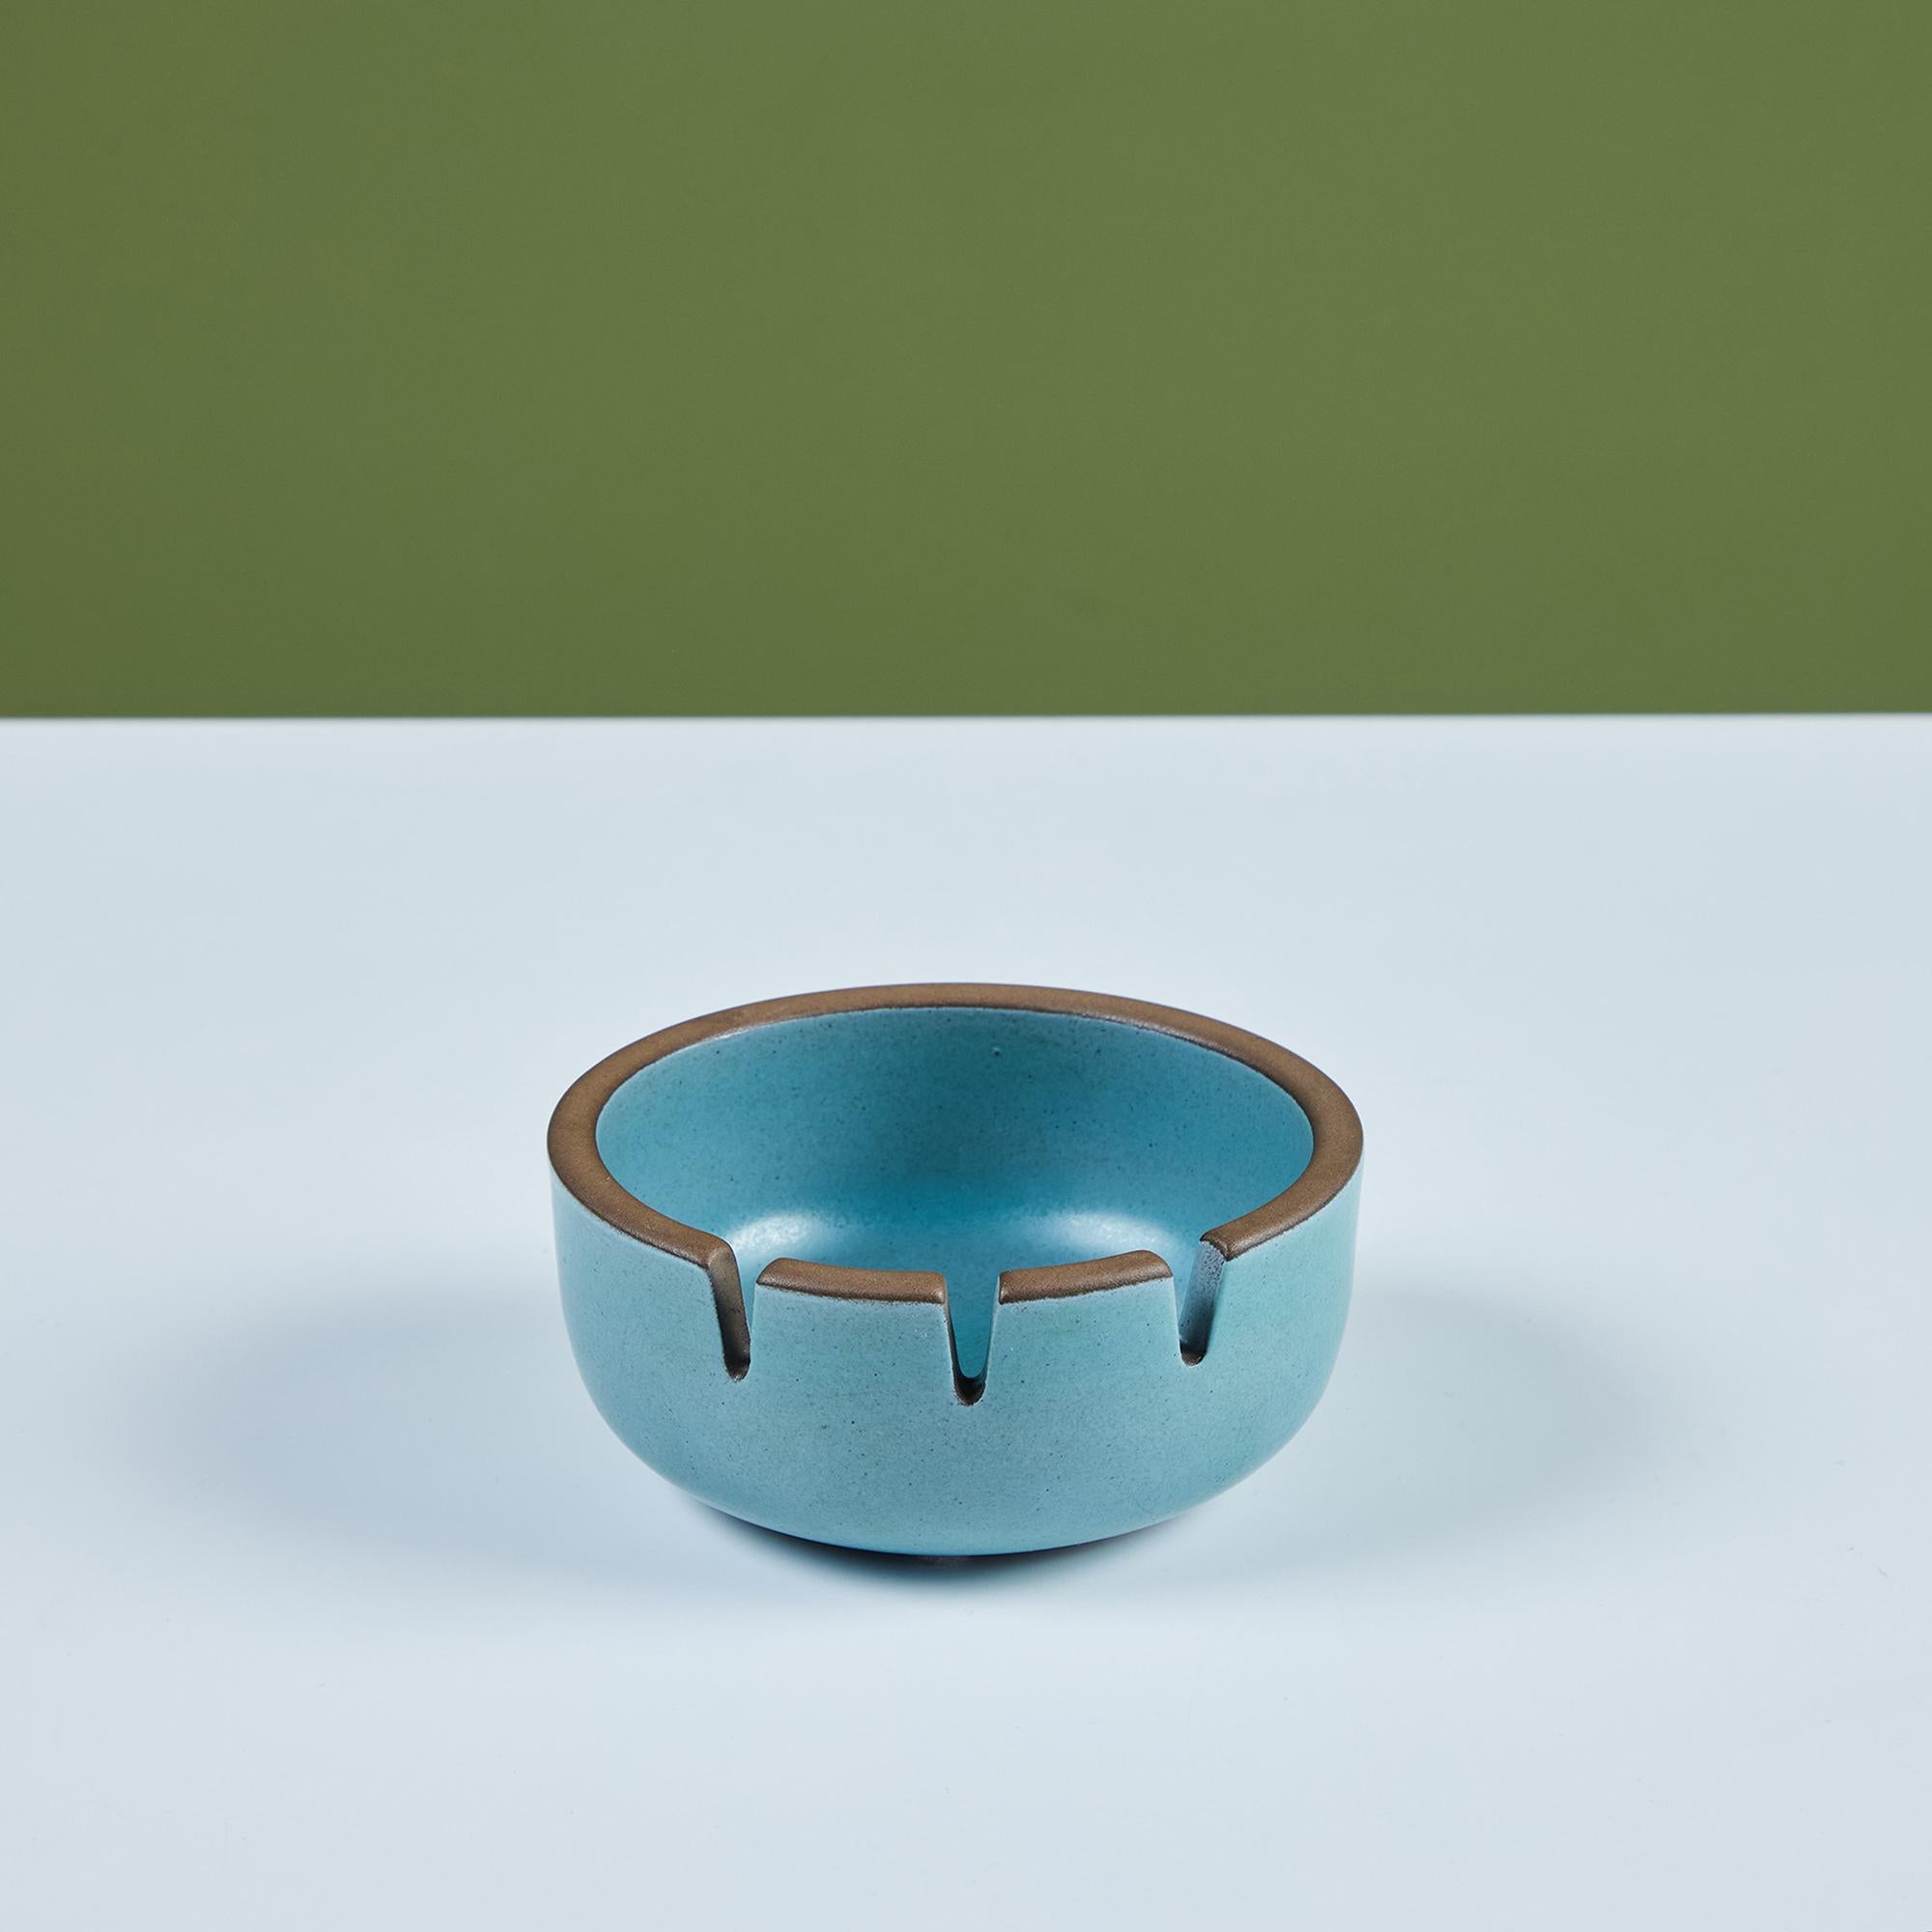 Glazed ceramic ashtray by Heath Ceramics, c.1960s, USA. The ashtray features a blue exterior and interior glaze. There are three holding slots for cigarettes. Can also be used as a decorative catchall or soap dish.
Inscribed on the underside, “Heath